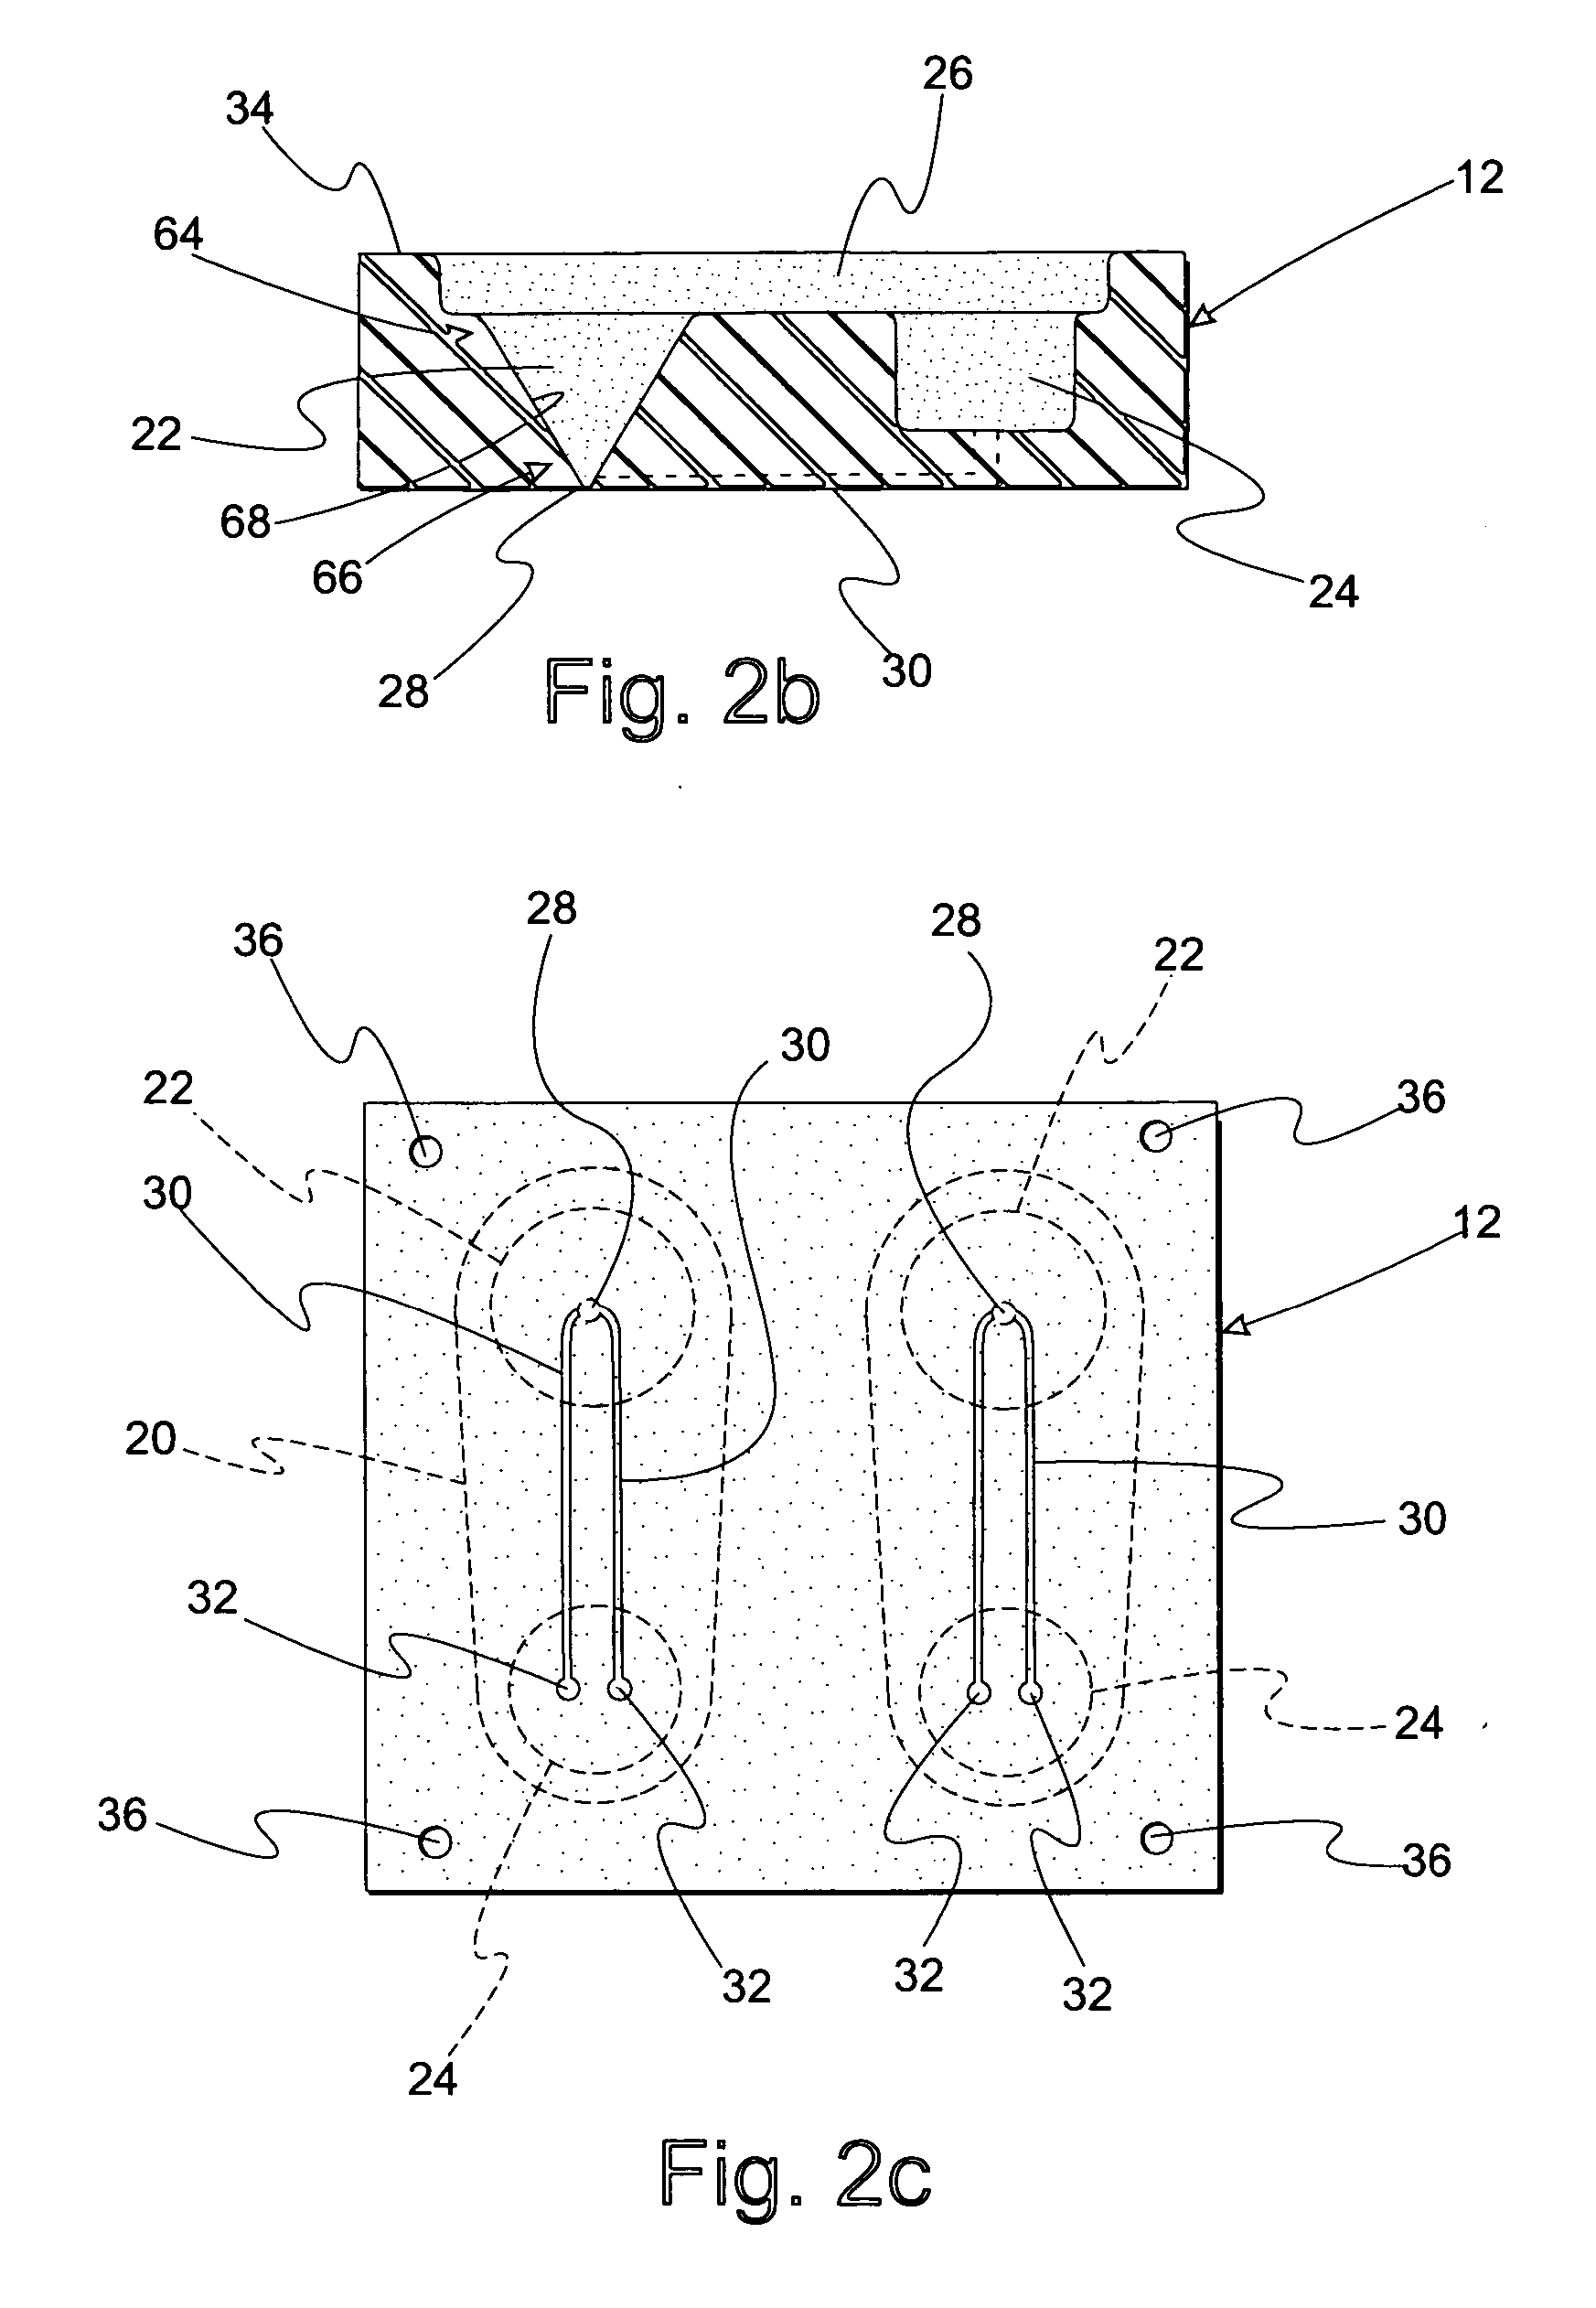 Microfluidic cell culture device and method for using same